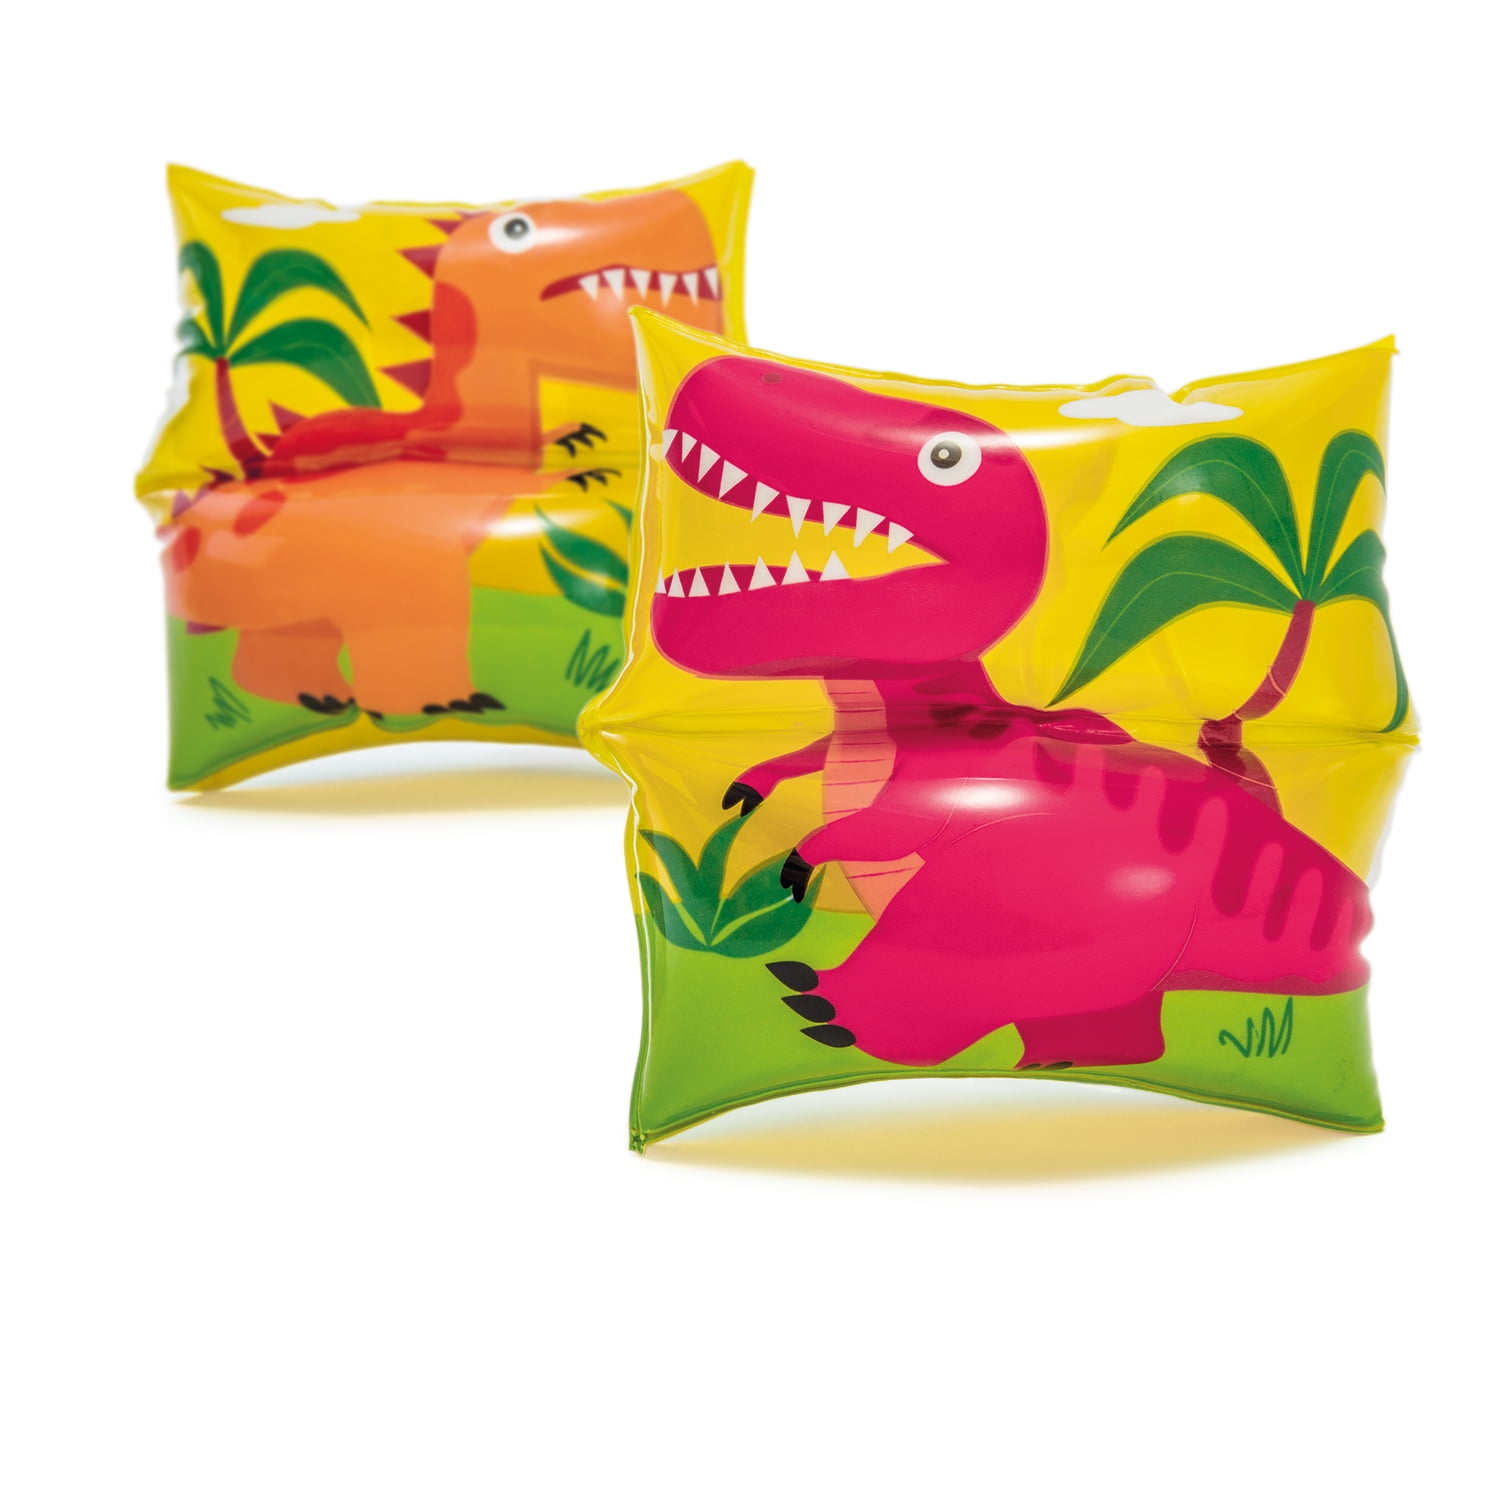 Intex Deluxe Kids Small Inflatable Swimming Arm Bands Age 3-6 Years 18-30 Kgs for sale online 